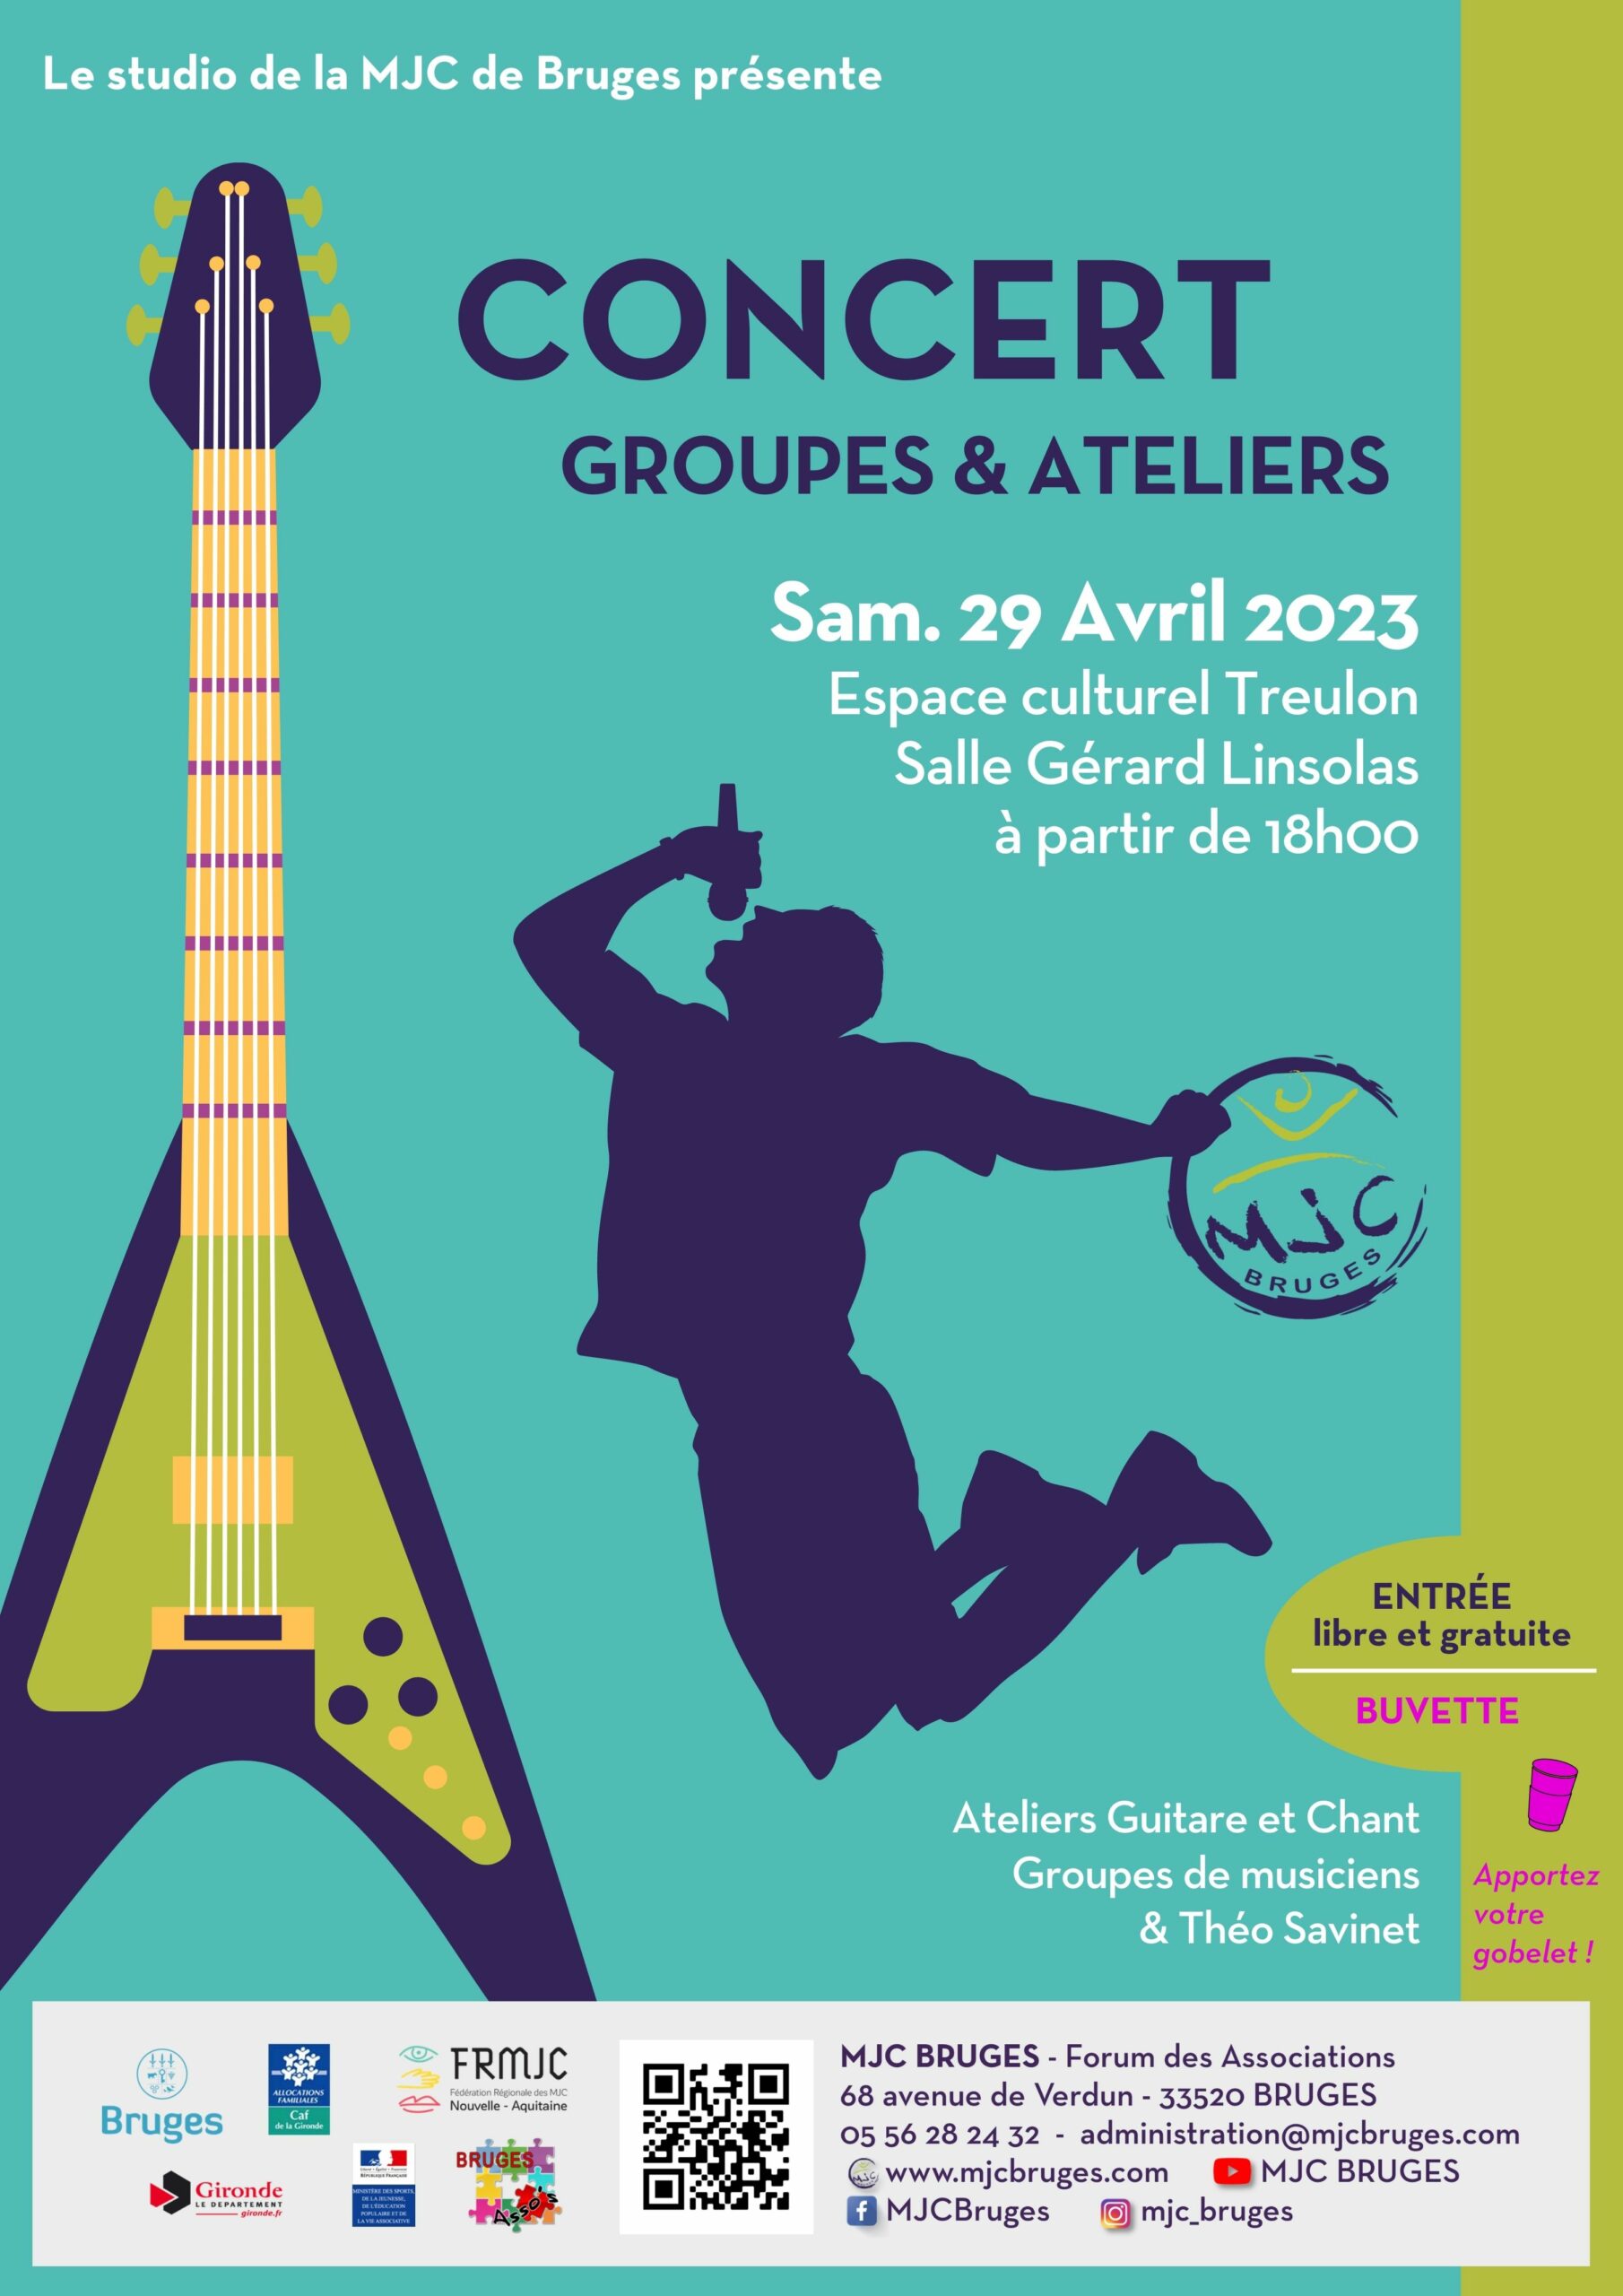 Concert groupes & ateliers - 29 avril 2023 - MJC Bruges